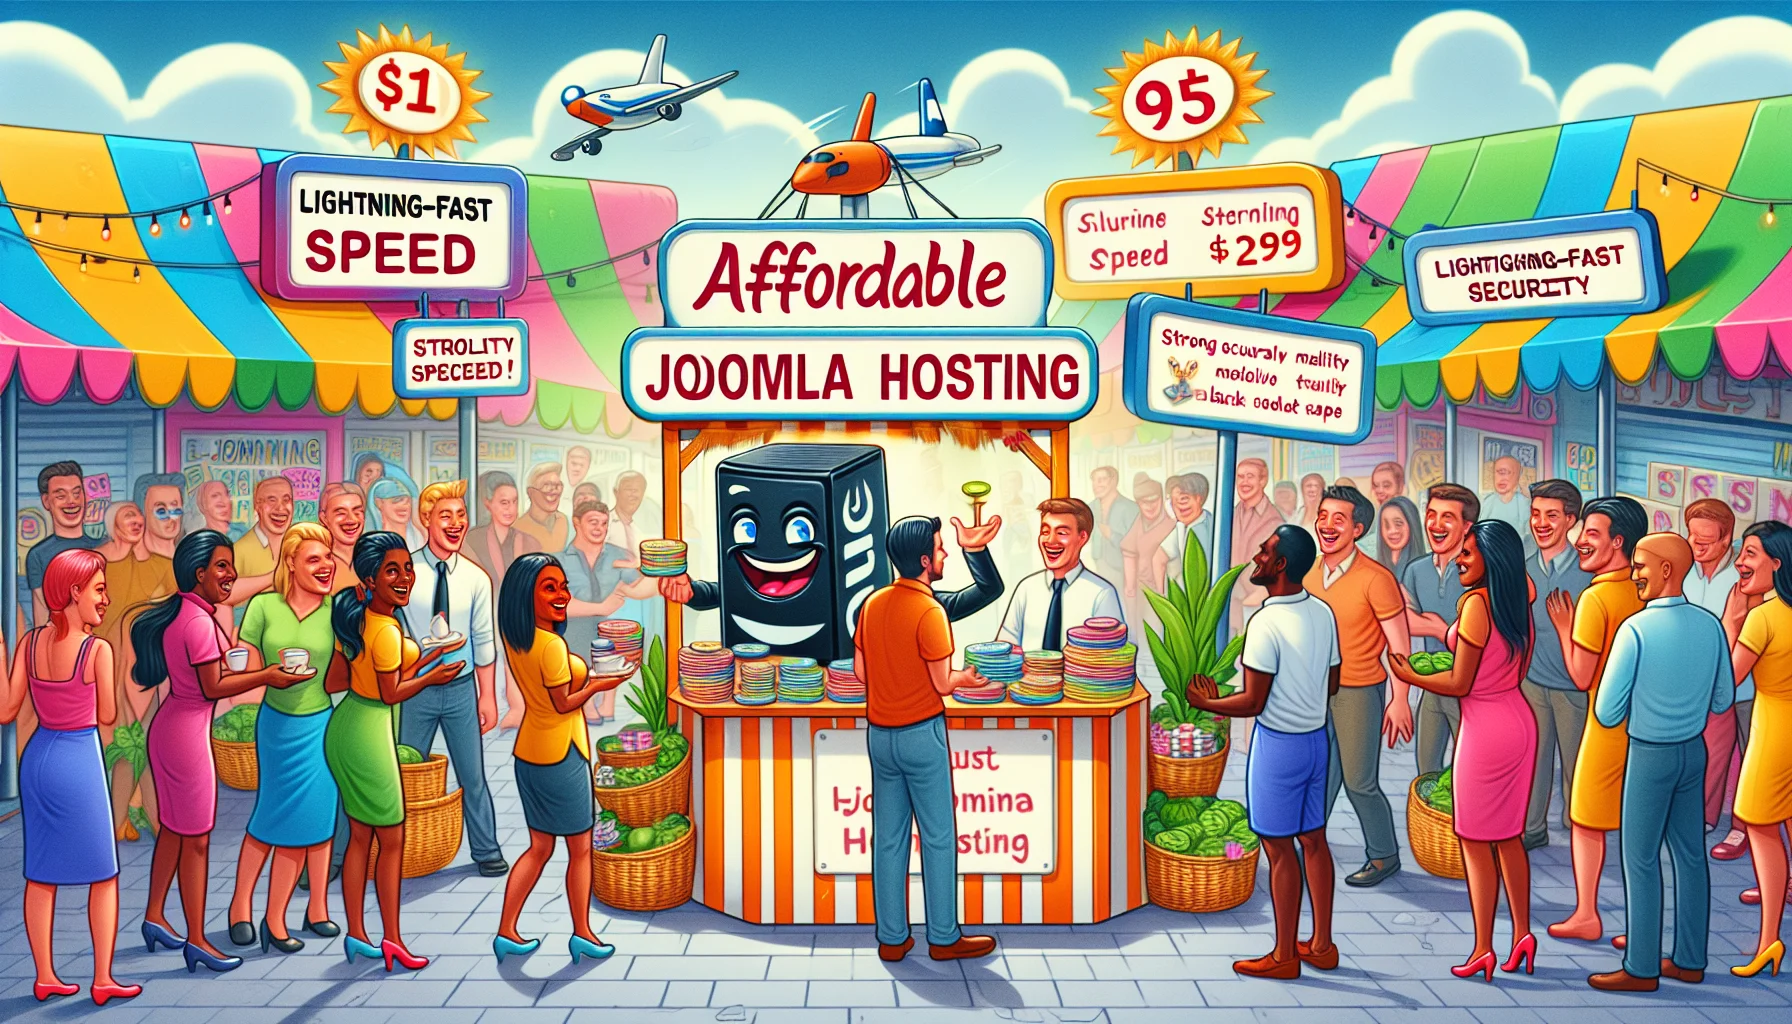 Create a vibrant and humorous image representing affordable Joomla hosting. The scene unfolds at a bustling digital marketplace. Vibrant stalls are adorned with signs boasting 'Cheap Joomla Hosting'. Eager customers, a mix of genders and descents such as Caucasian, Hispanic, South Asian, and Middle Eastern, are being welcomed by friendly salespeople of different genders and descents like Black and White. They are excitedly inspecting the stalls, comparing prices and features. A particularly comic touch could be a cartoonish depiction of a super-fast, smiling server offering 'lightning-fast speed', meanwhile a metaphorical representation of strong security could be a robust digital lock, chuckling while keeping harmful elements at bay. The overall atmosphere should reflect the irresistible allure of economical, quality Joomla web hosting.